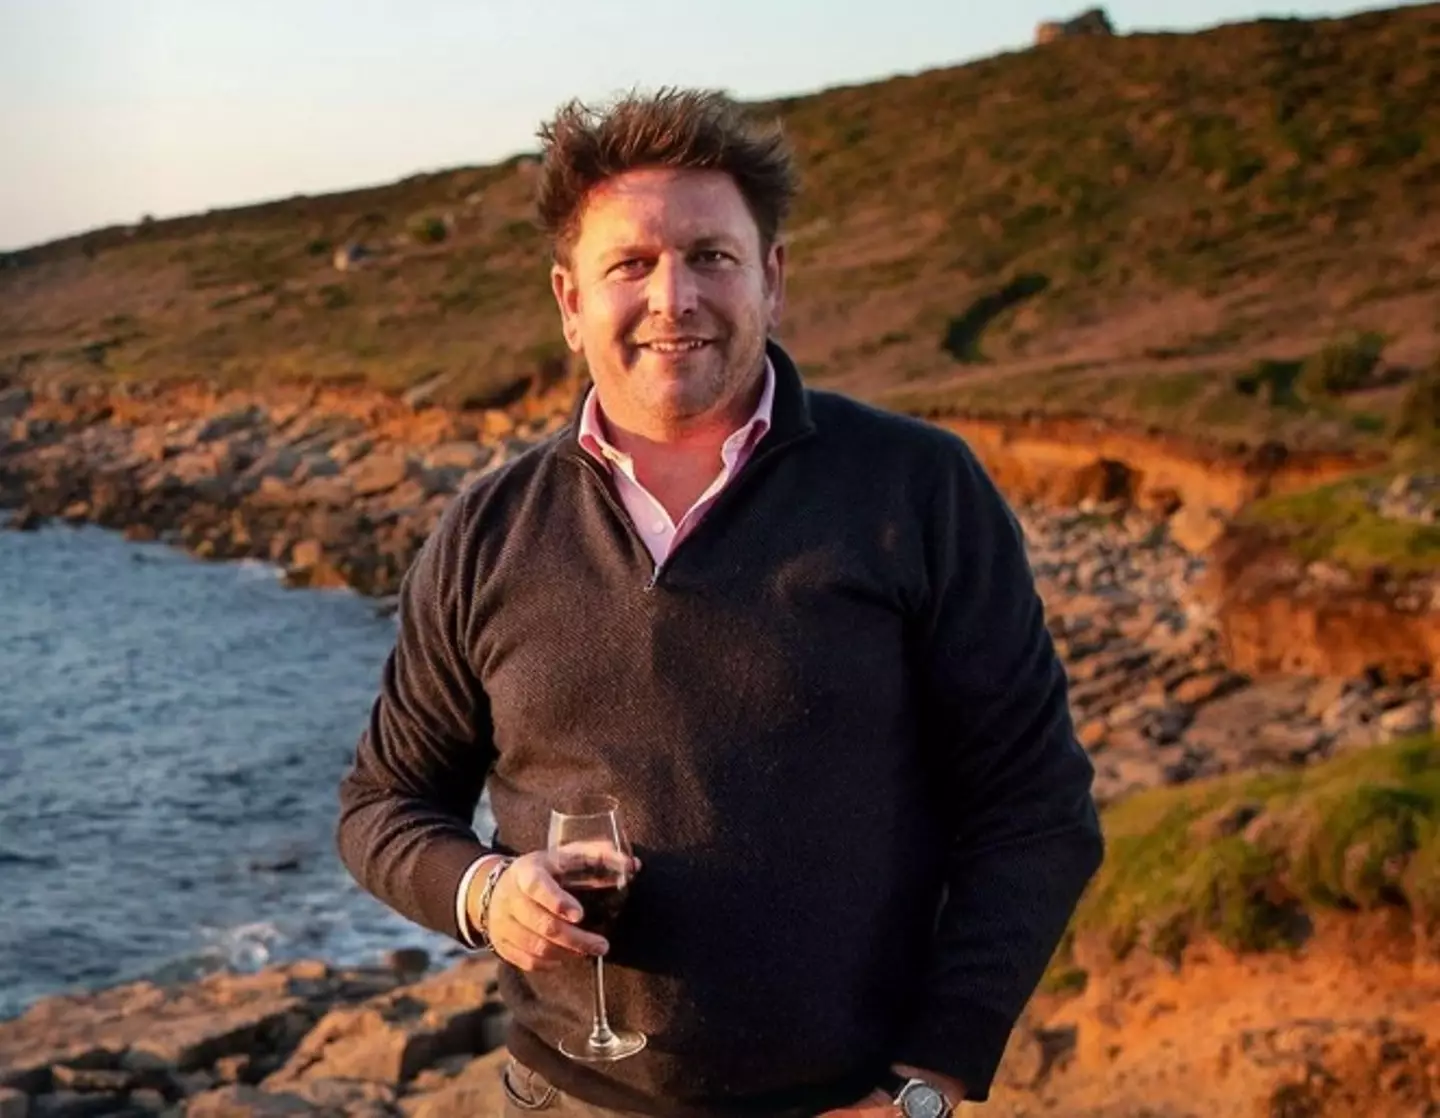 James Martin has presented a range of shows on ITV since joining the broadcaster.